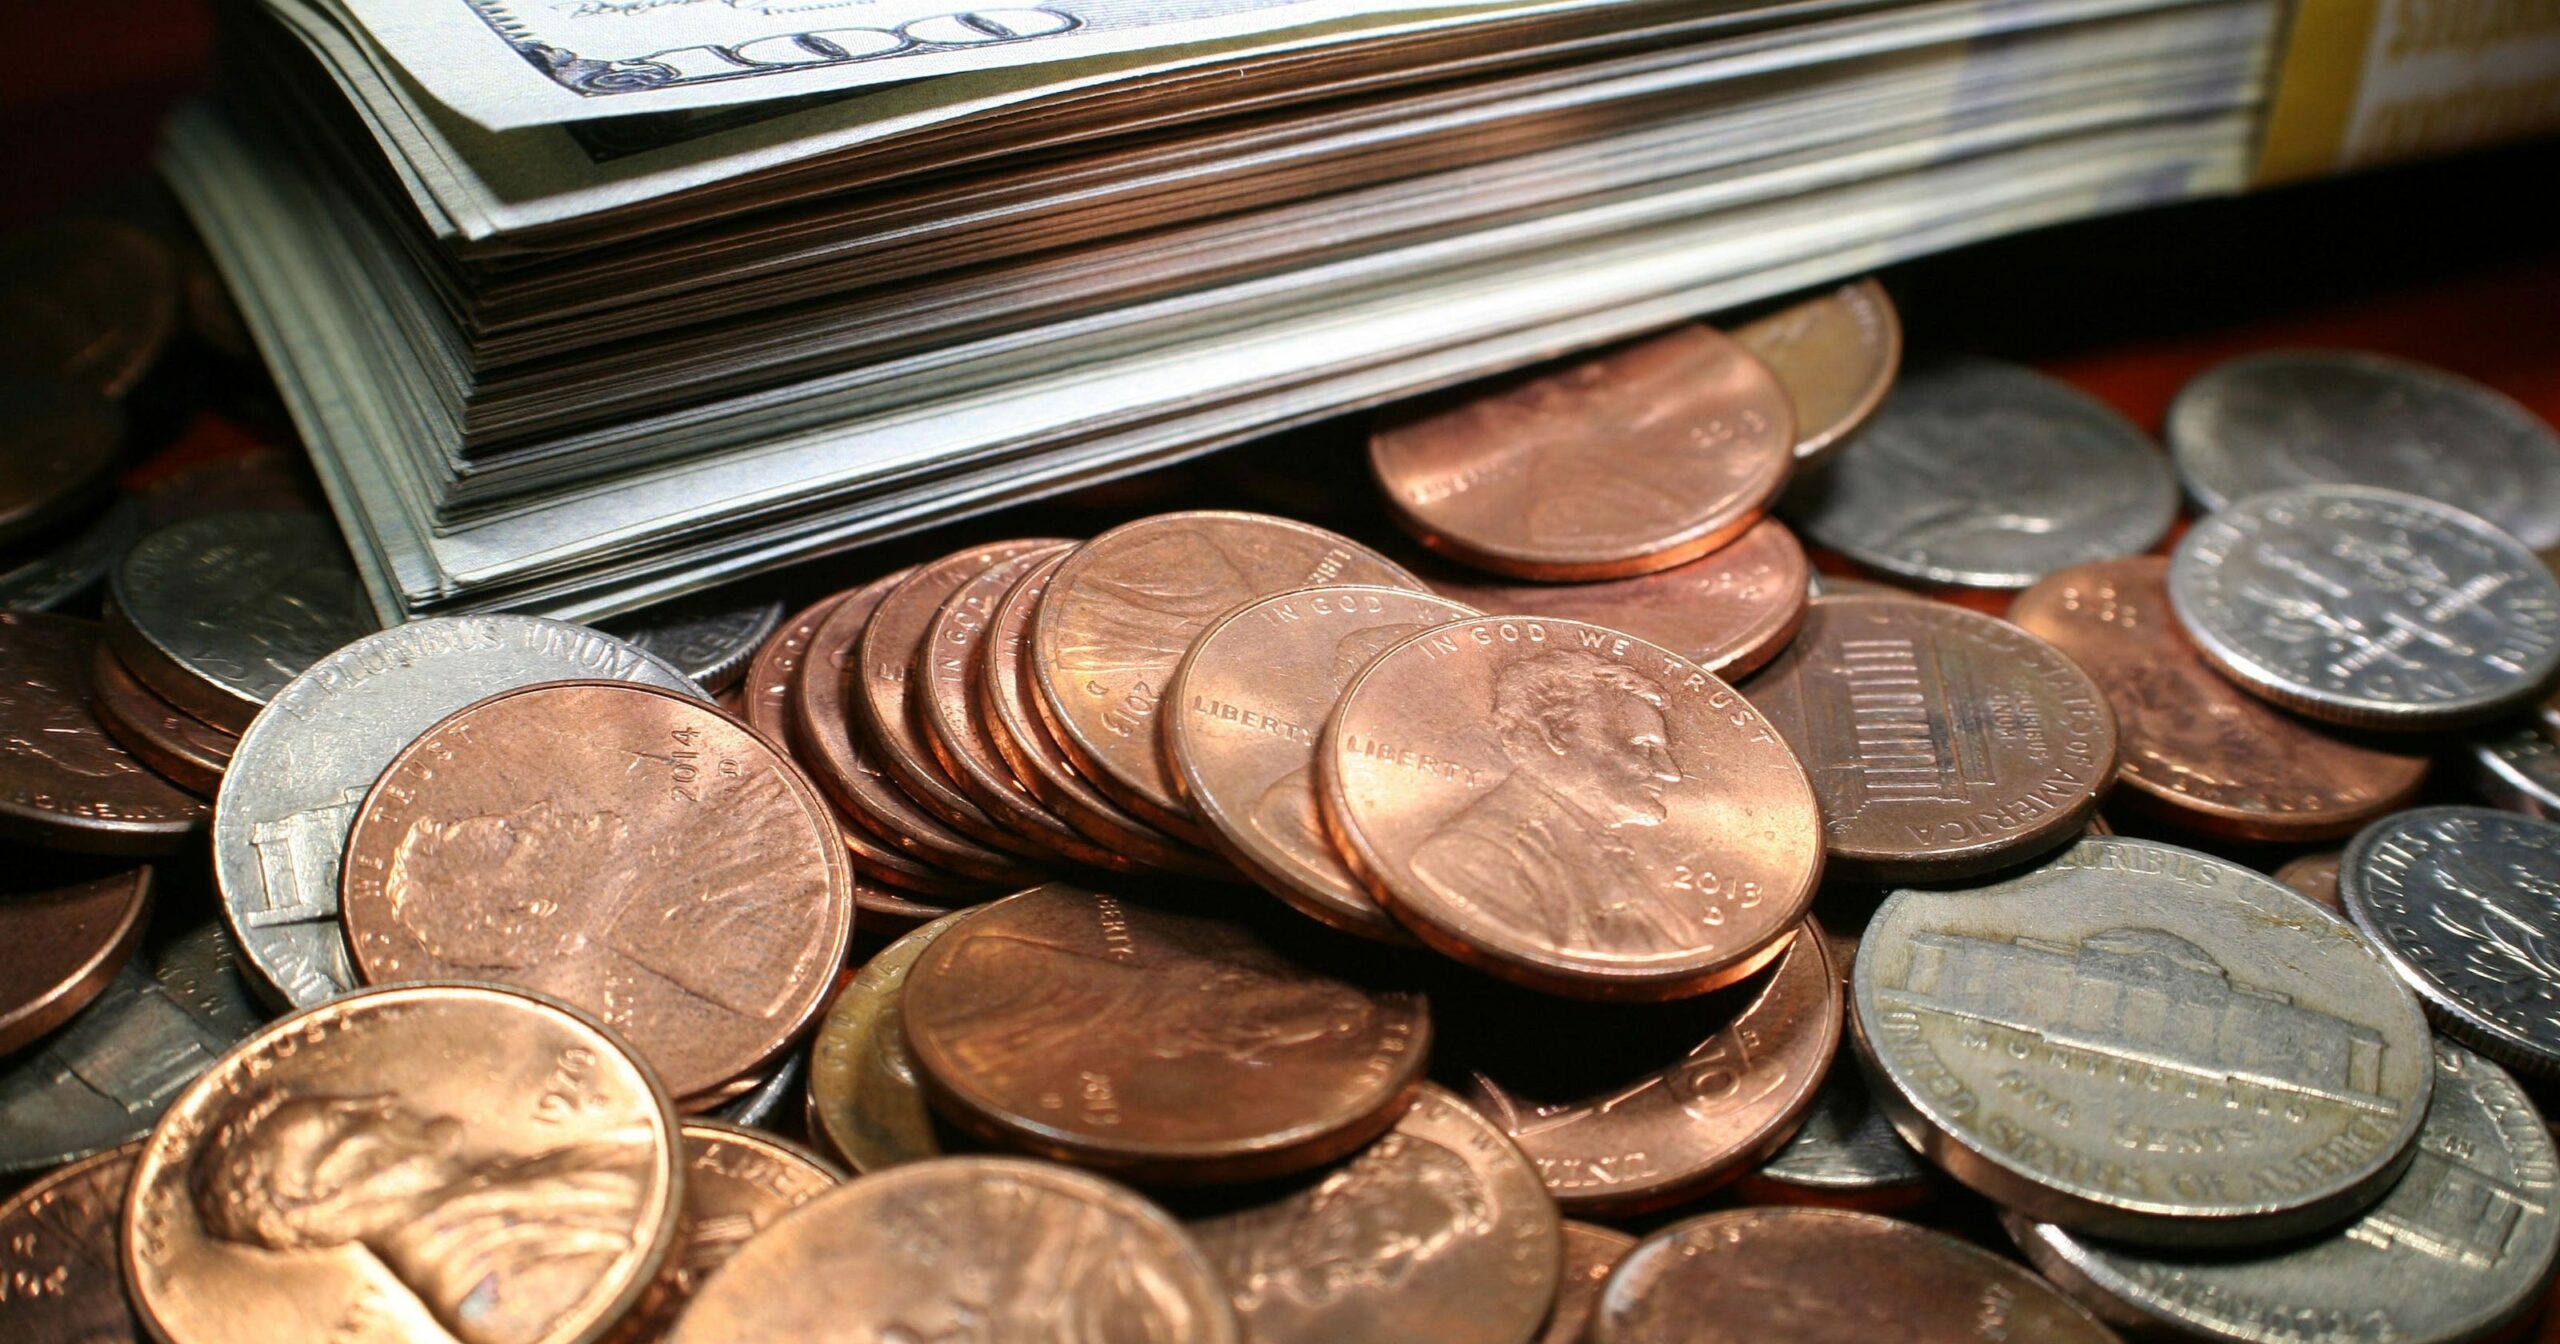 National coin shortage: Pennies, nickels, dimes and quarters part of latest COVID-19 shortage